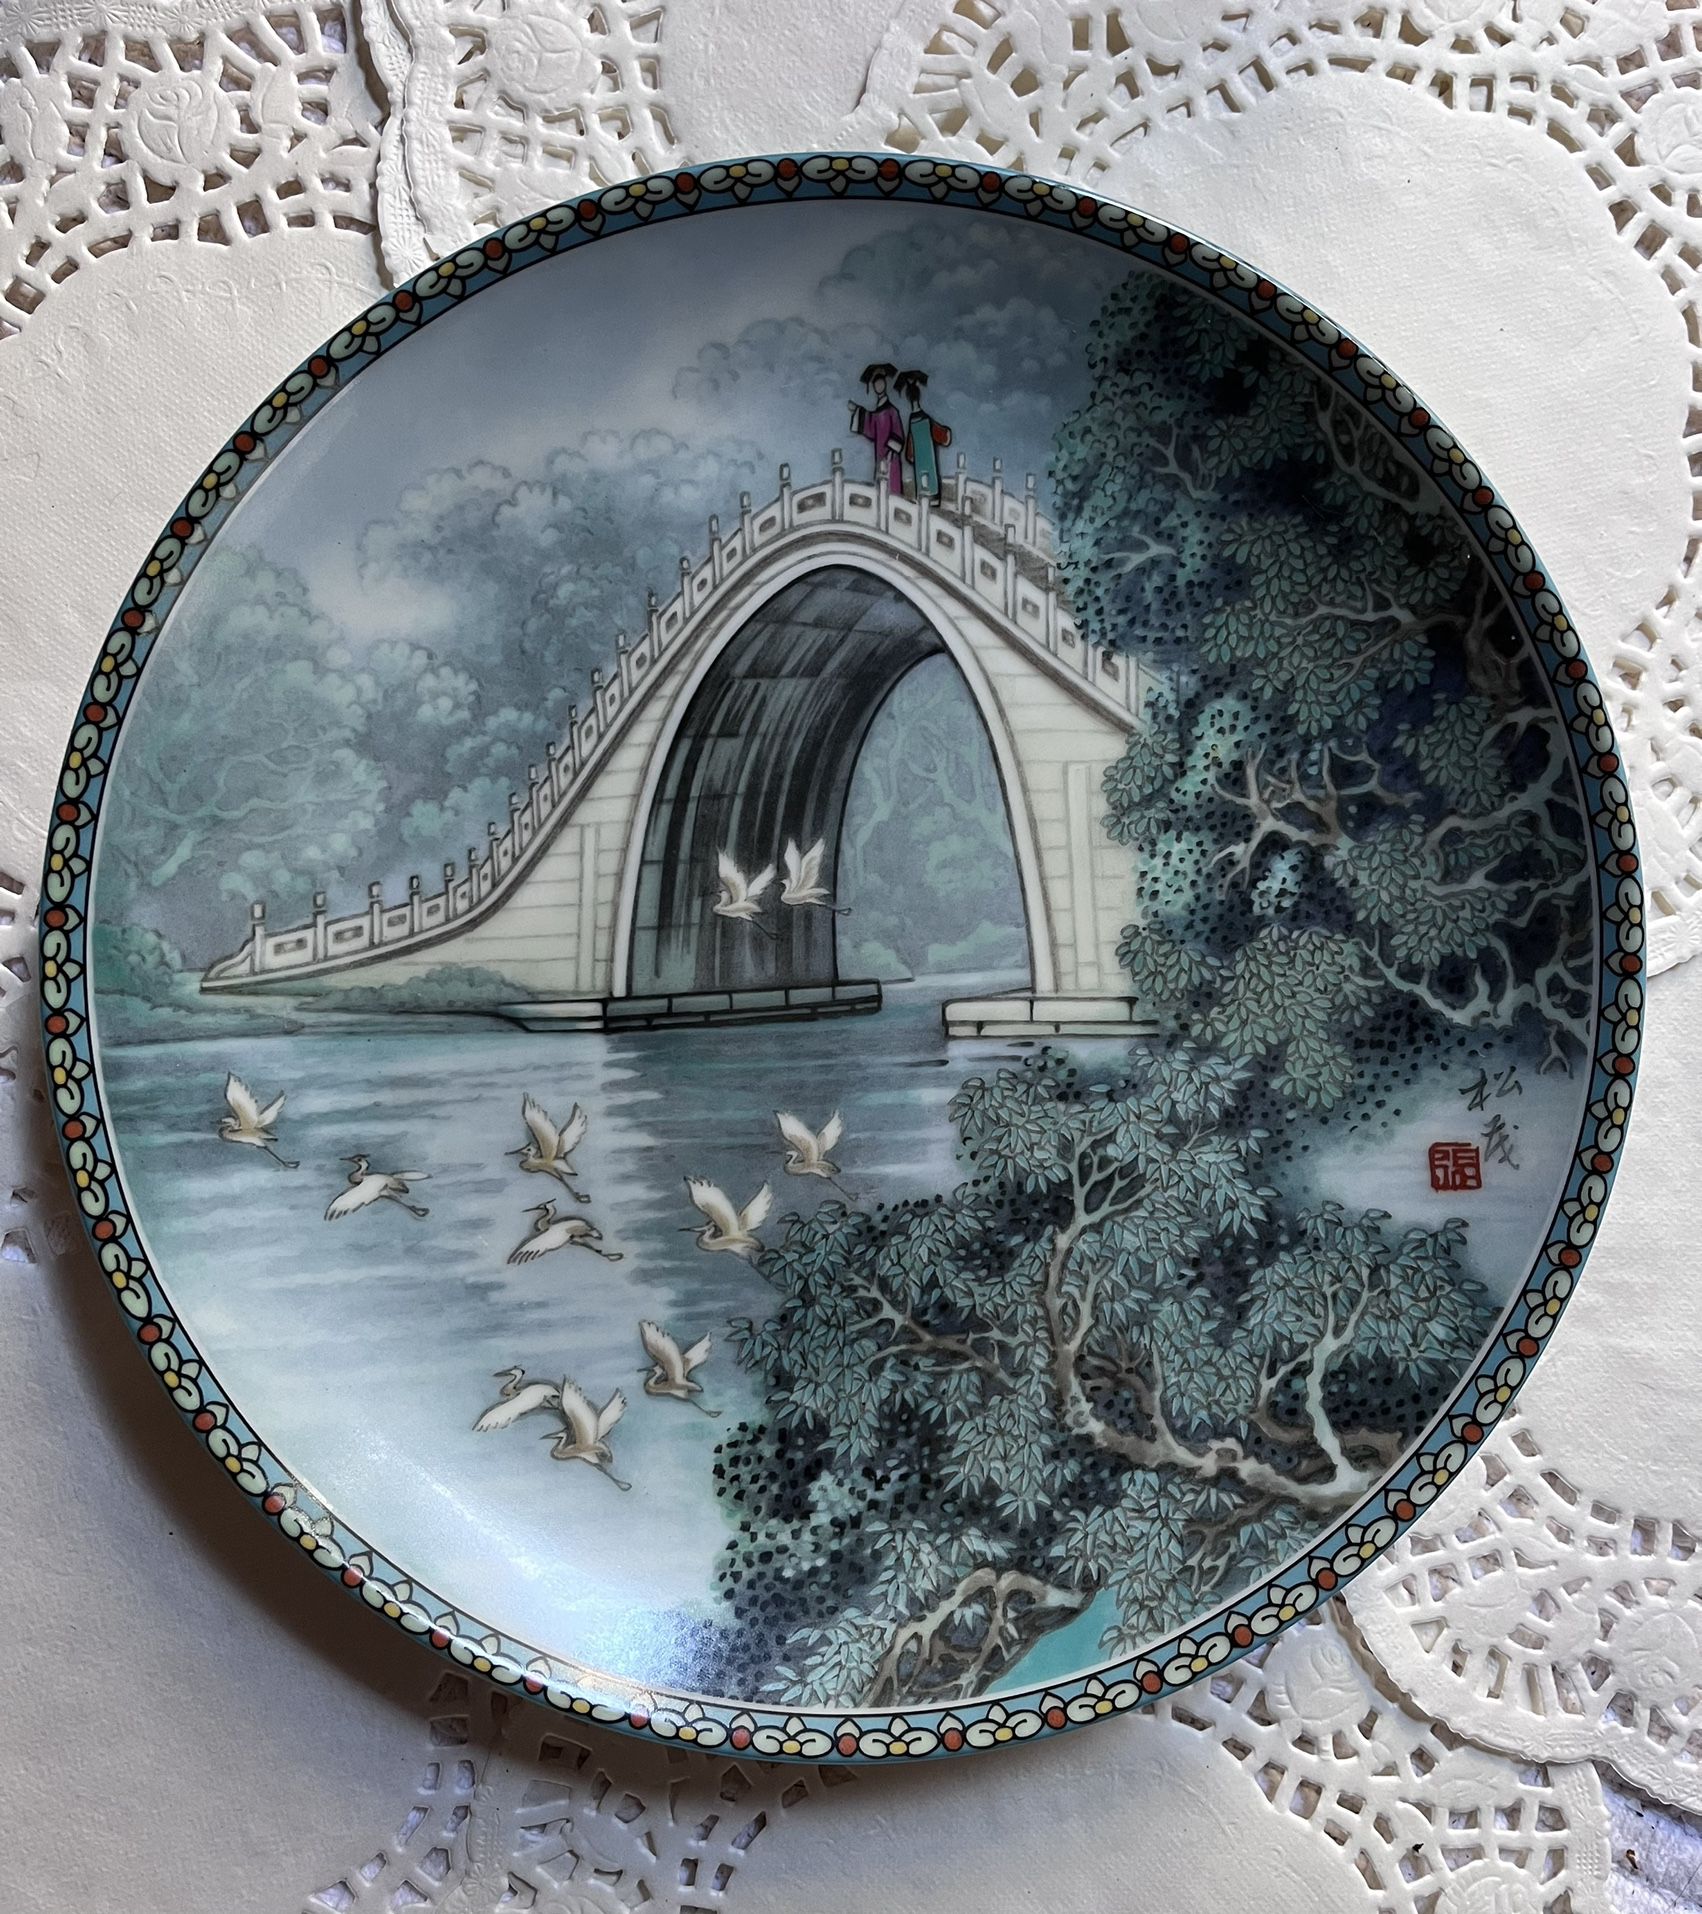 Vintage 1988 Chinese Collector Plate JADE BELT BRIDGE Artist Zhang Song Mao Signed